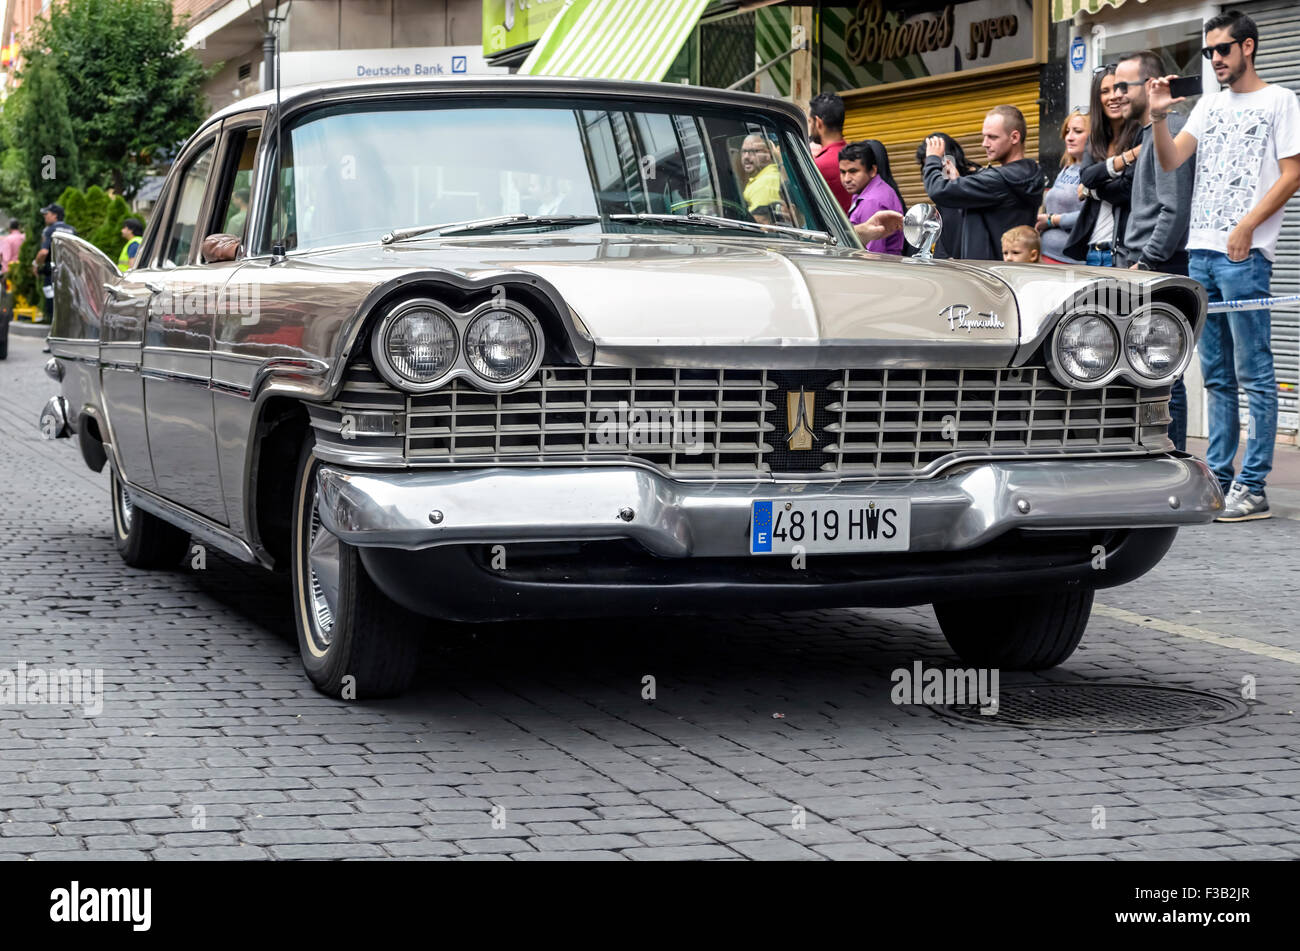 Torrejon de Ardoz, Spain. 3rd October, 2015. Meeting of classic american cars, during the patronal festivals, by the streets of Torrejon de Ardoz, on October 3th 2015. Beautiful champagne color car, Plymouth Fury of 1959. Credit:  Russet apple/Alamy Live News Stock Photo